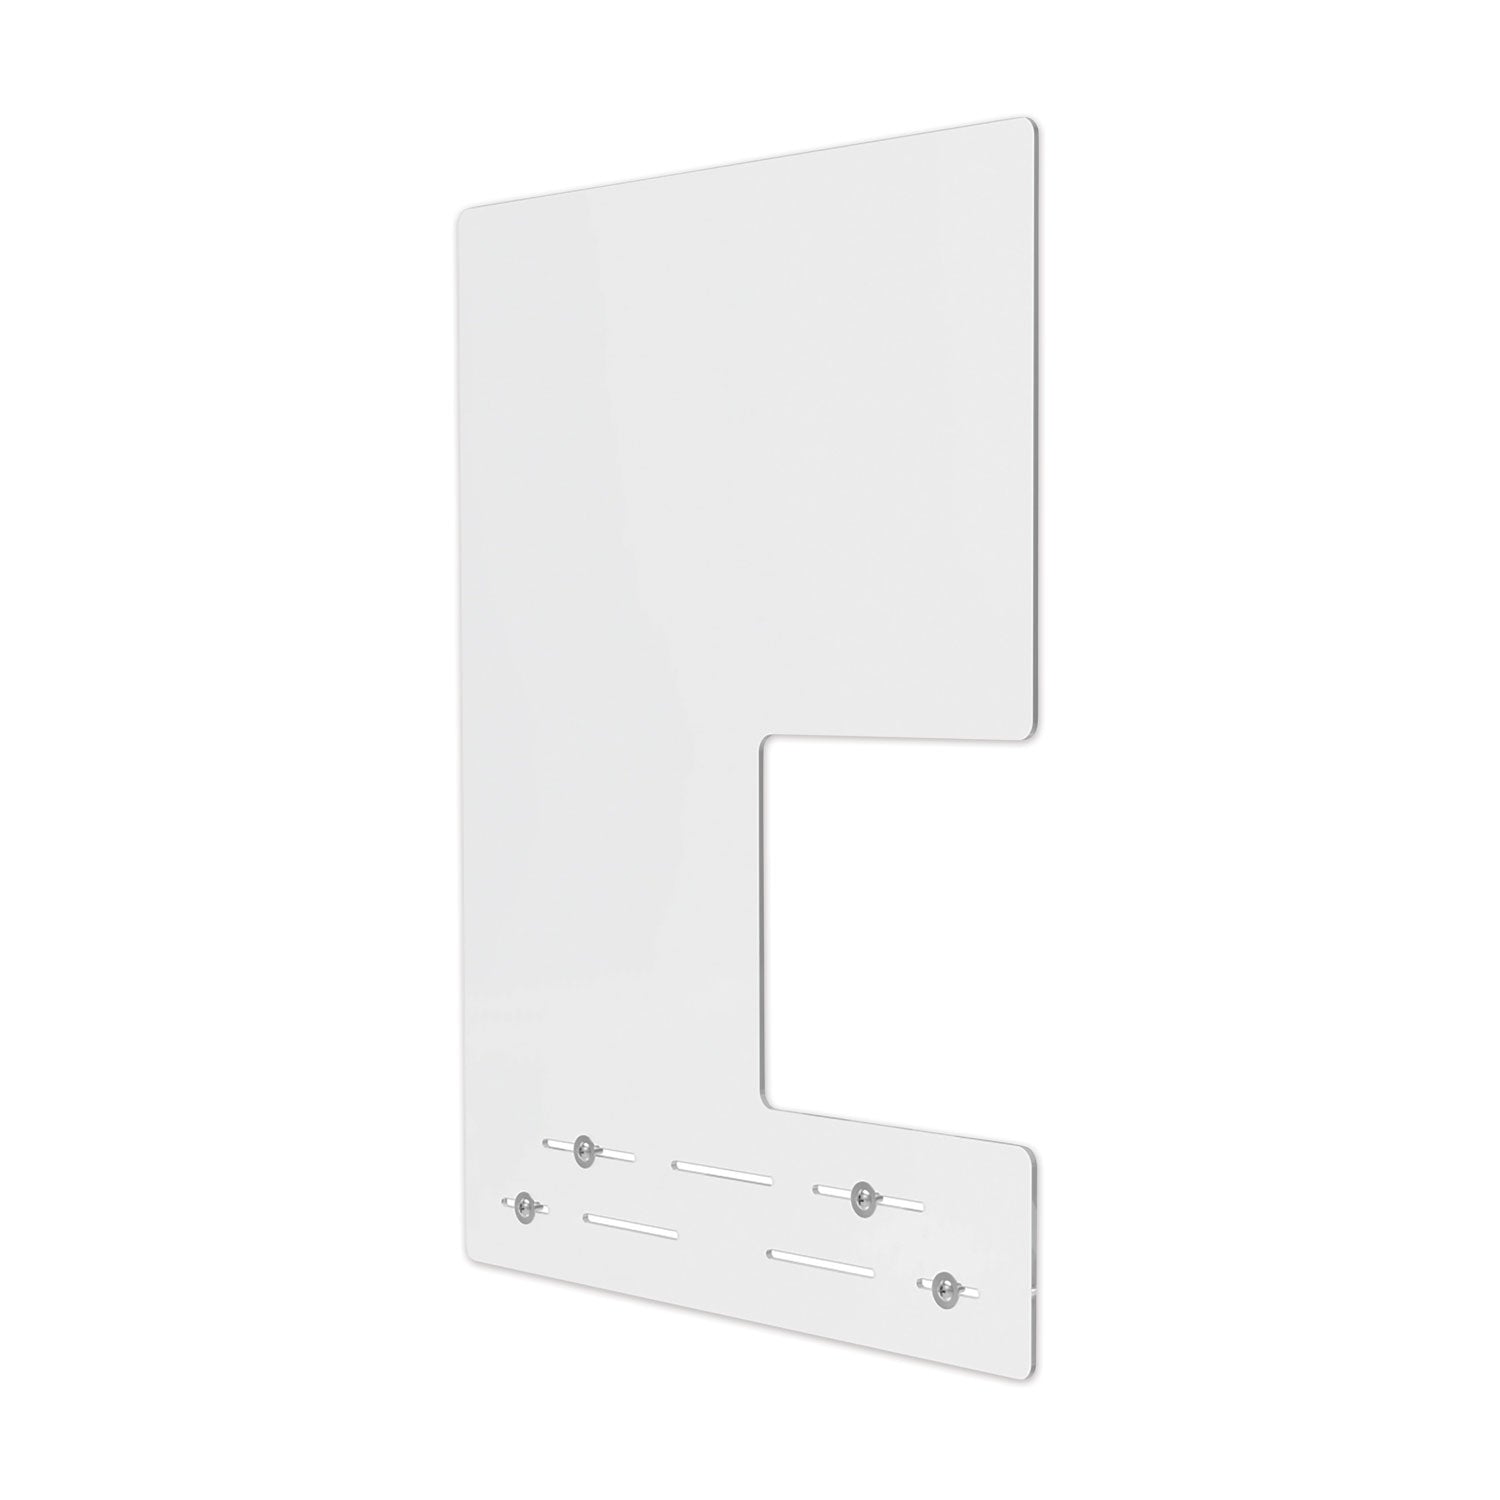 mounting-safety-barrier-with-side-pass-thru-2375-x-3175-acrylic-clear-2-carton_defpbcma2331s - 1